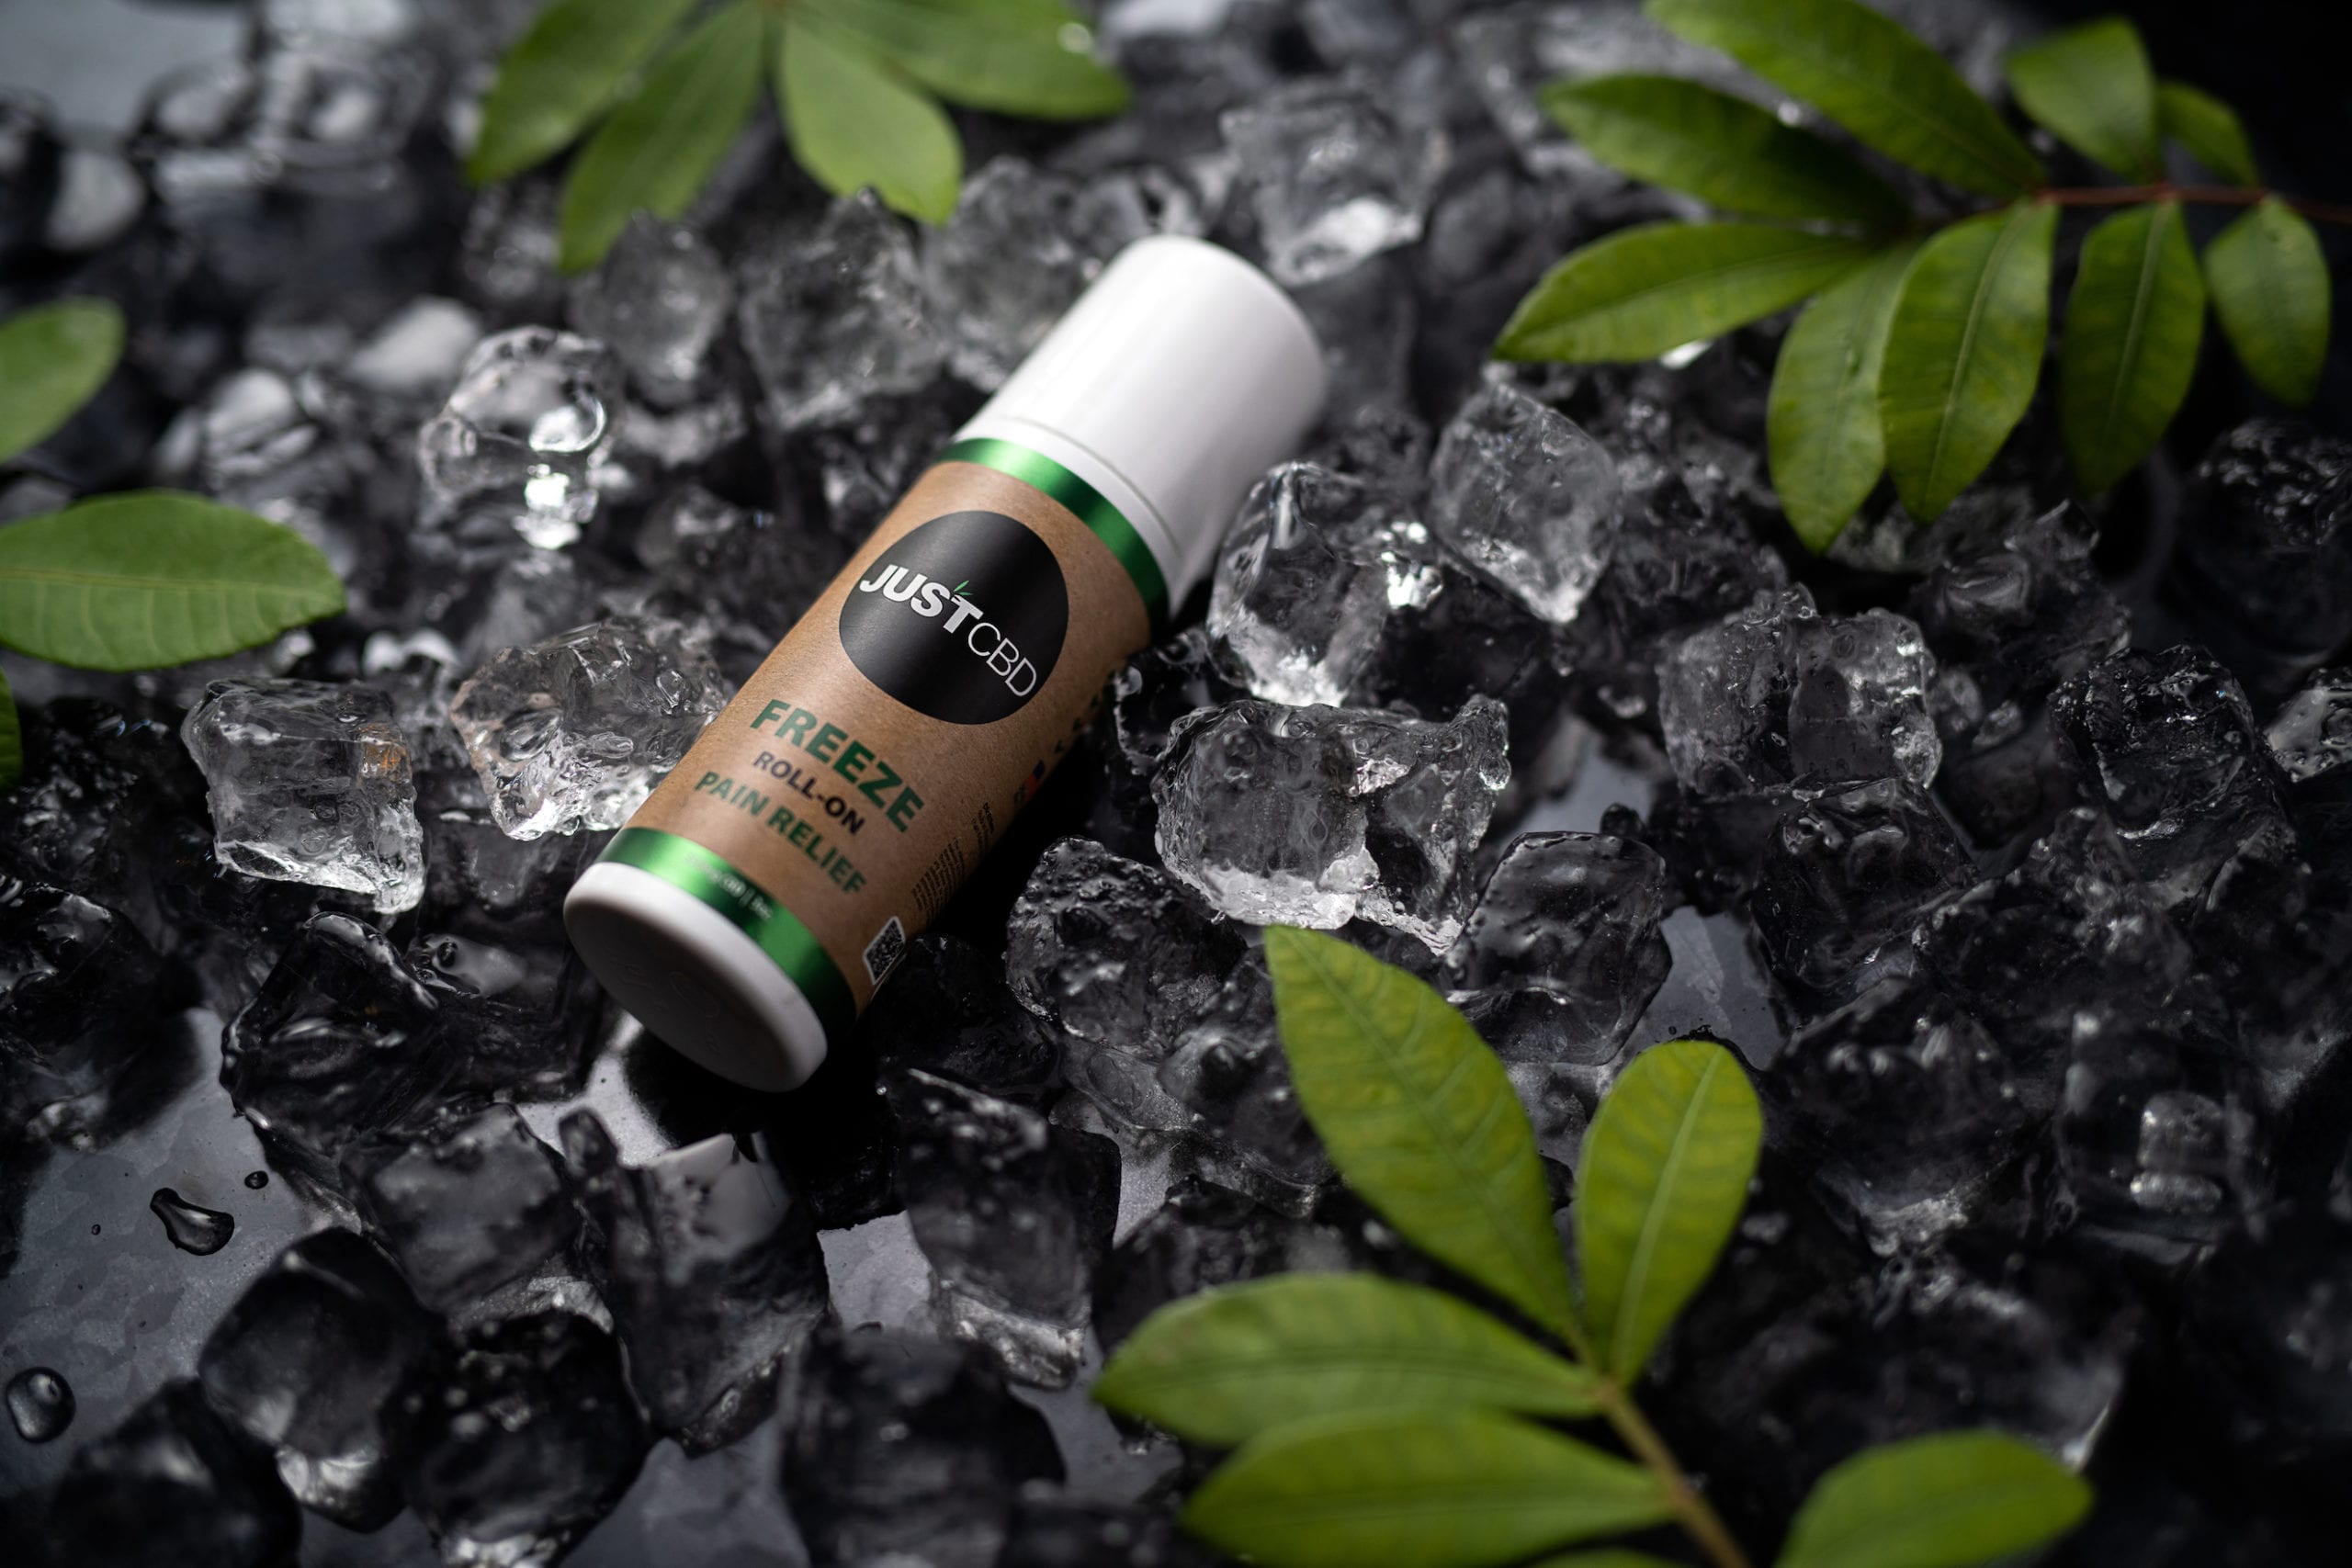 JustCBD Product Photography and Just CBD Products Freeze roll pain relief container on display on a pile of ice with green plant leaves nearby